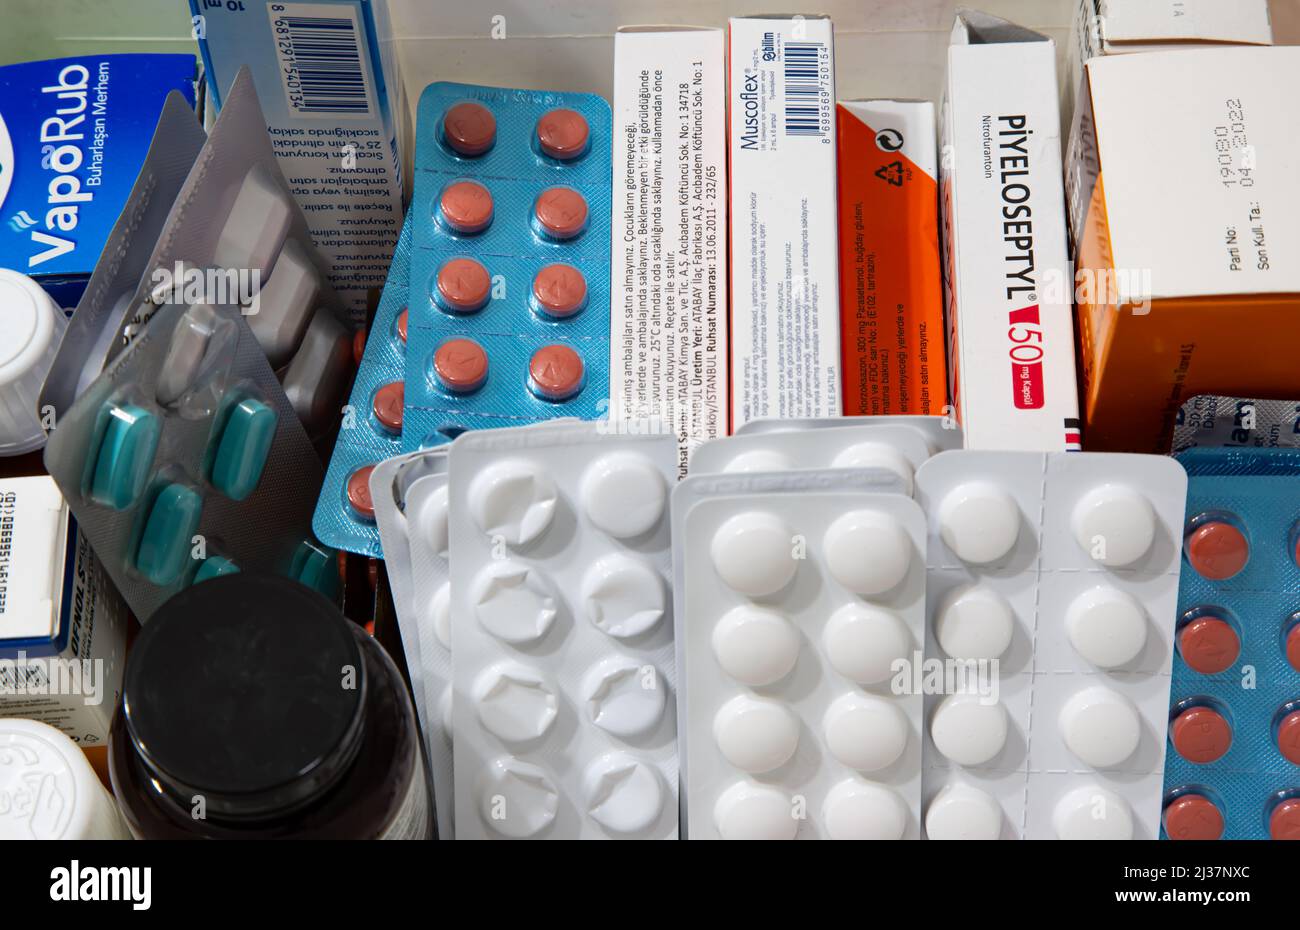 Various drugs filled in boxes. Medicines in plastic tablets. Painkillers, antibiotics, ointments and liquid medicines from different trademarks. Stock Photo